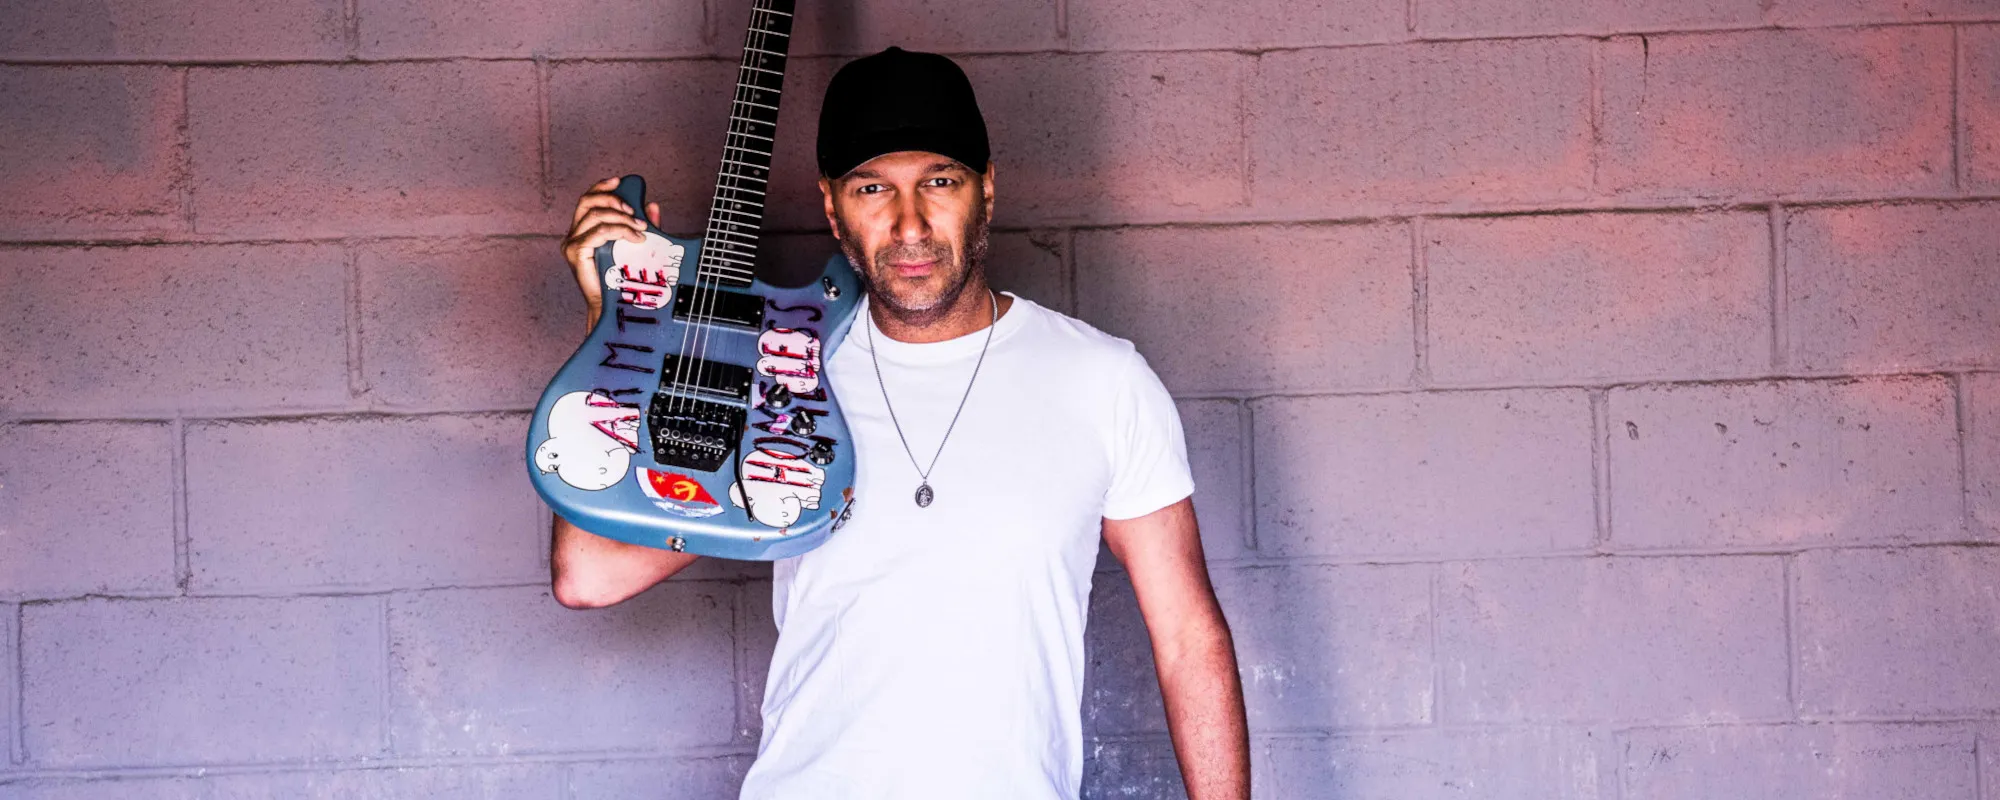 Tom Morello Pens Open Letter to Call For Evacuation of Female Guitar Students in Afghanistan